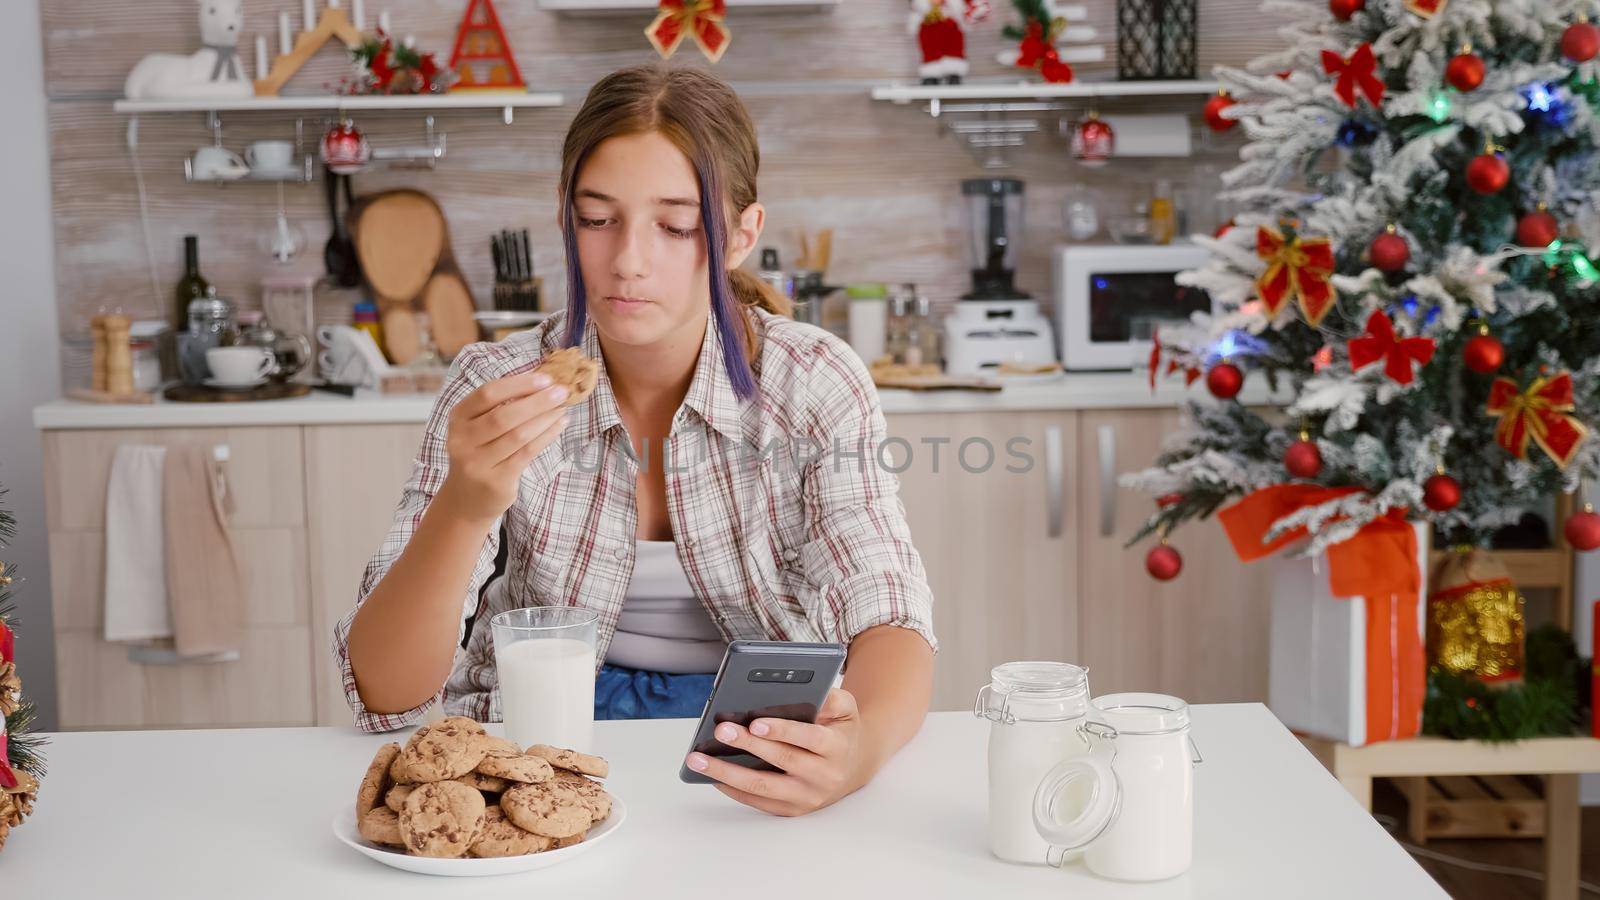 Happy girl enjoying winter holiday sitting at table in xmas decorated kitchen browsing on smartphone by DCStudio